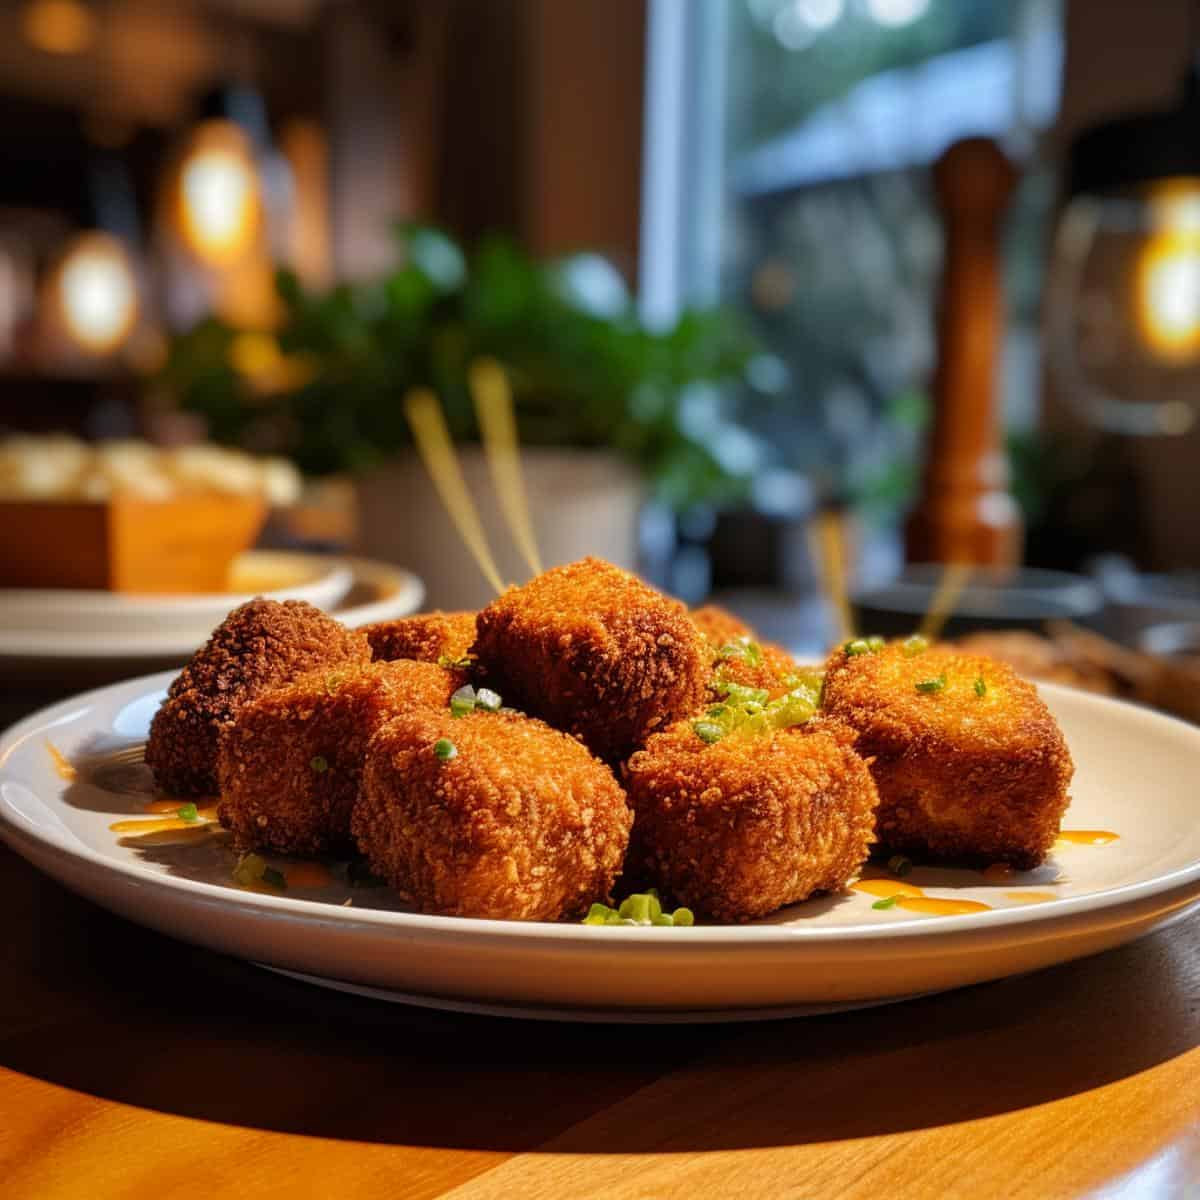 Croquettes on a kitchen counter